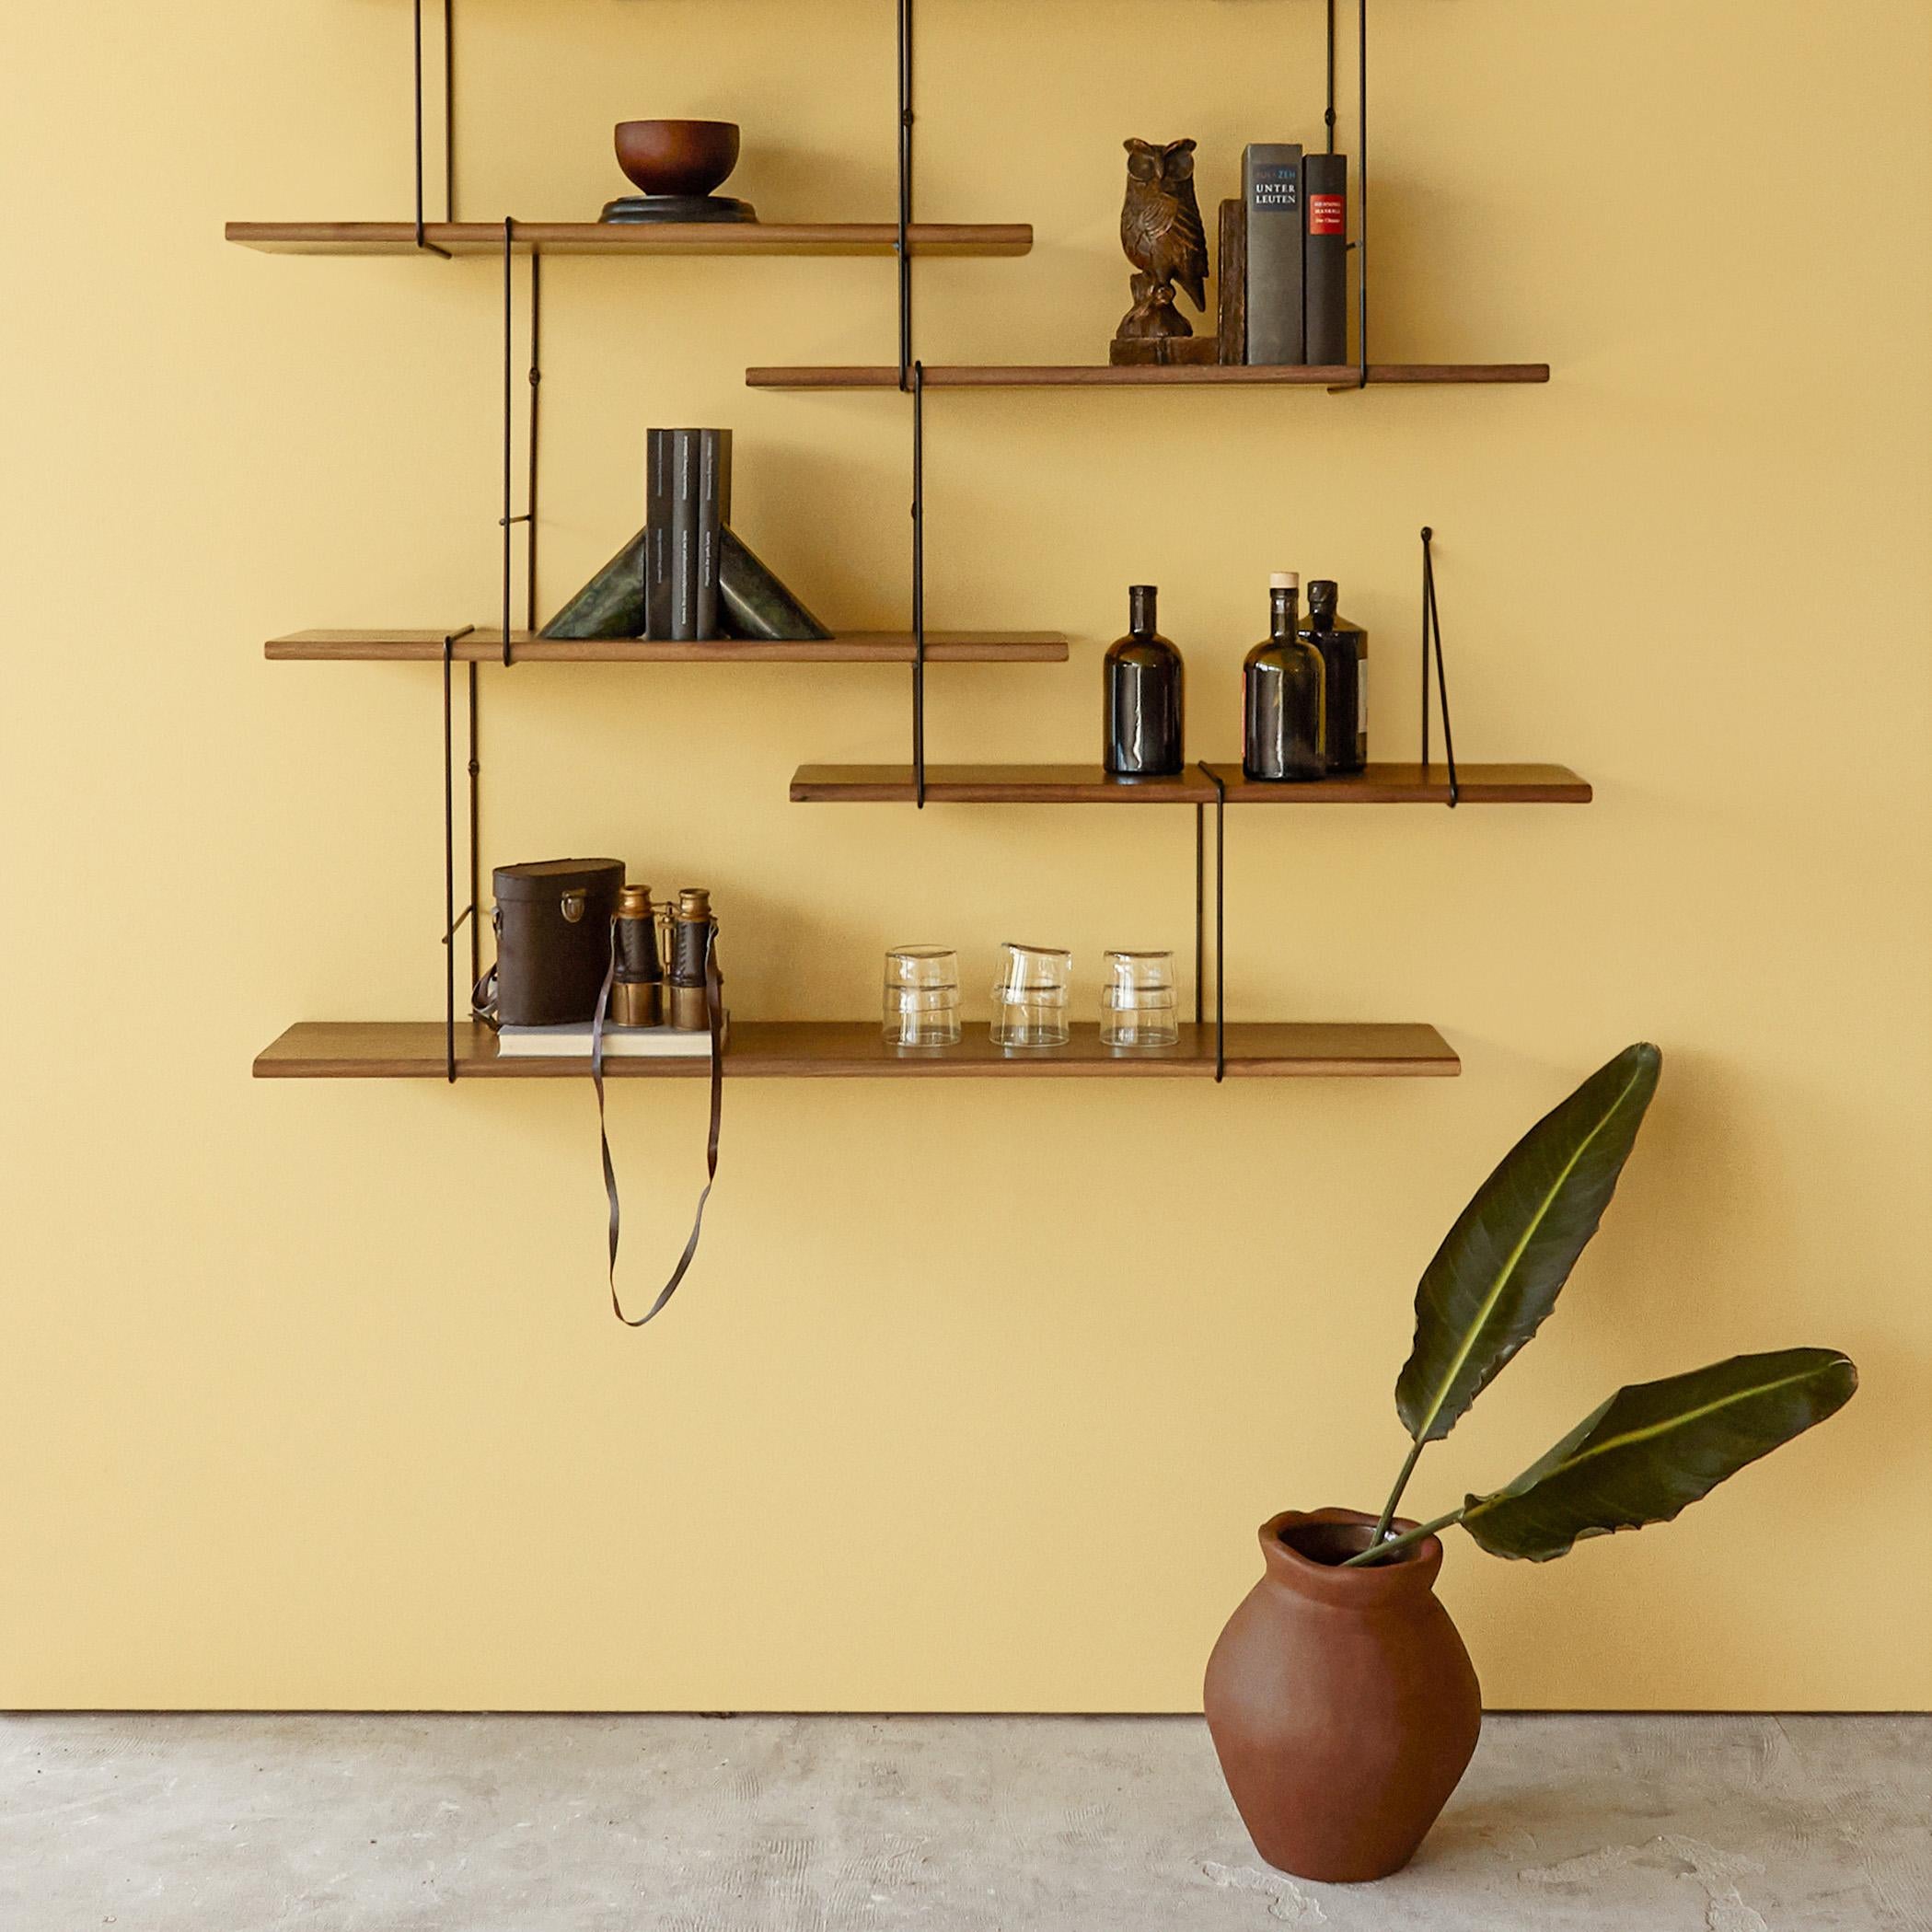 The Link shelf is display and storage stripped down to the essentials. Its steel and wood construction forms an engaging interplay with many potential compositions: asymmetrical, highreaching, or laid out lengthwise. It is designed to work perfectly